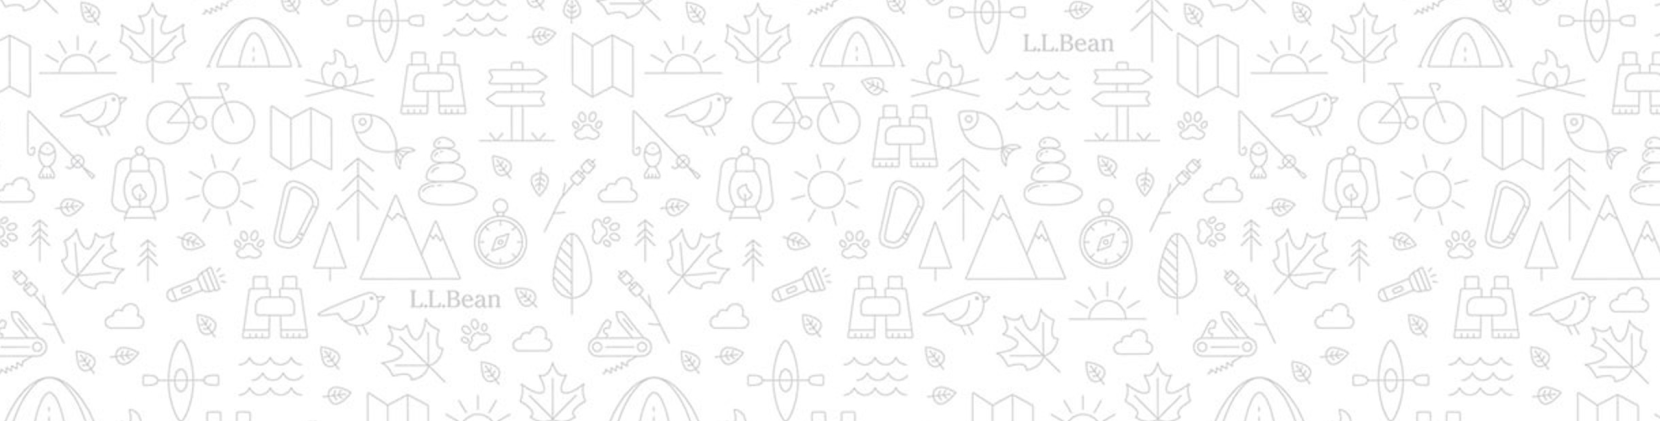 various outdoor related icons